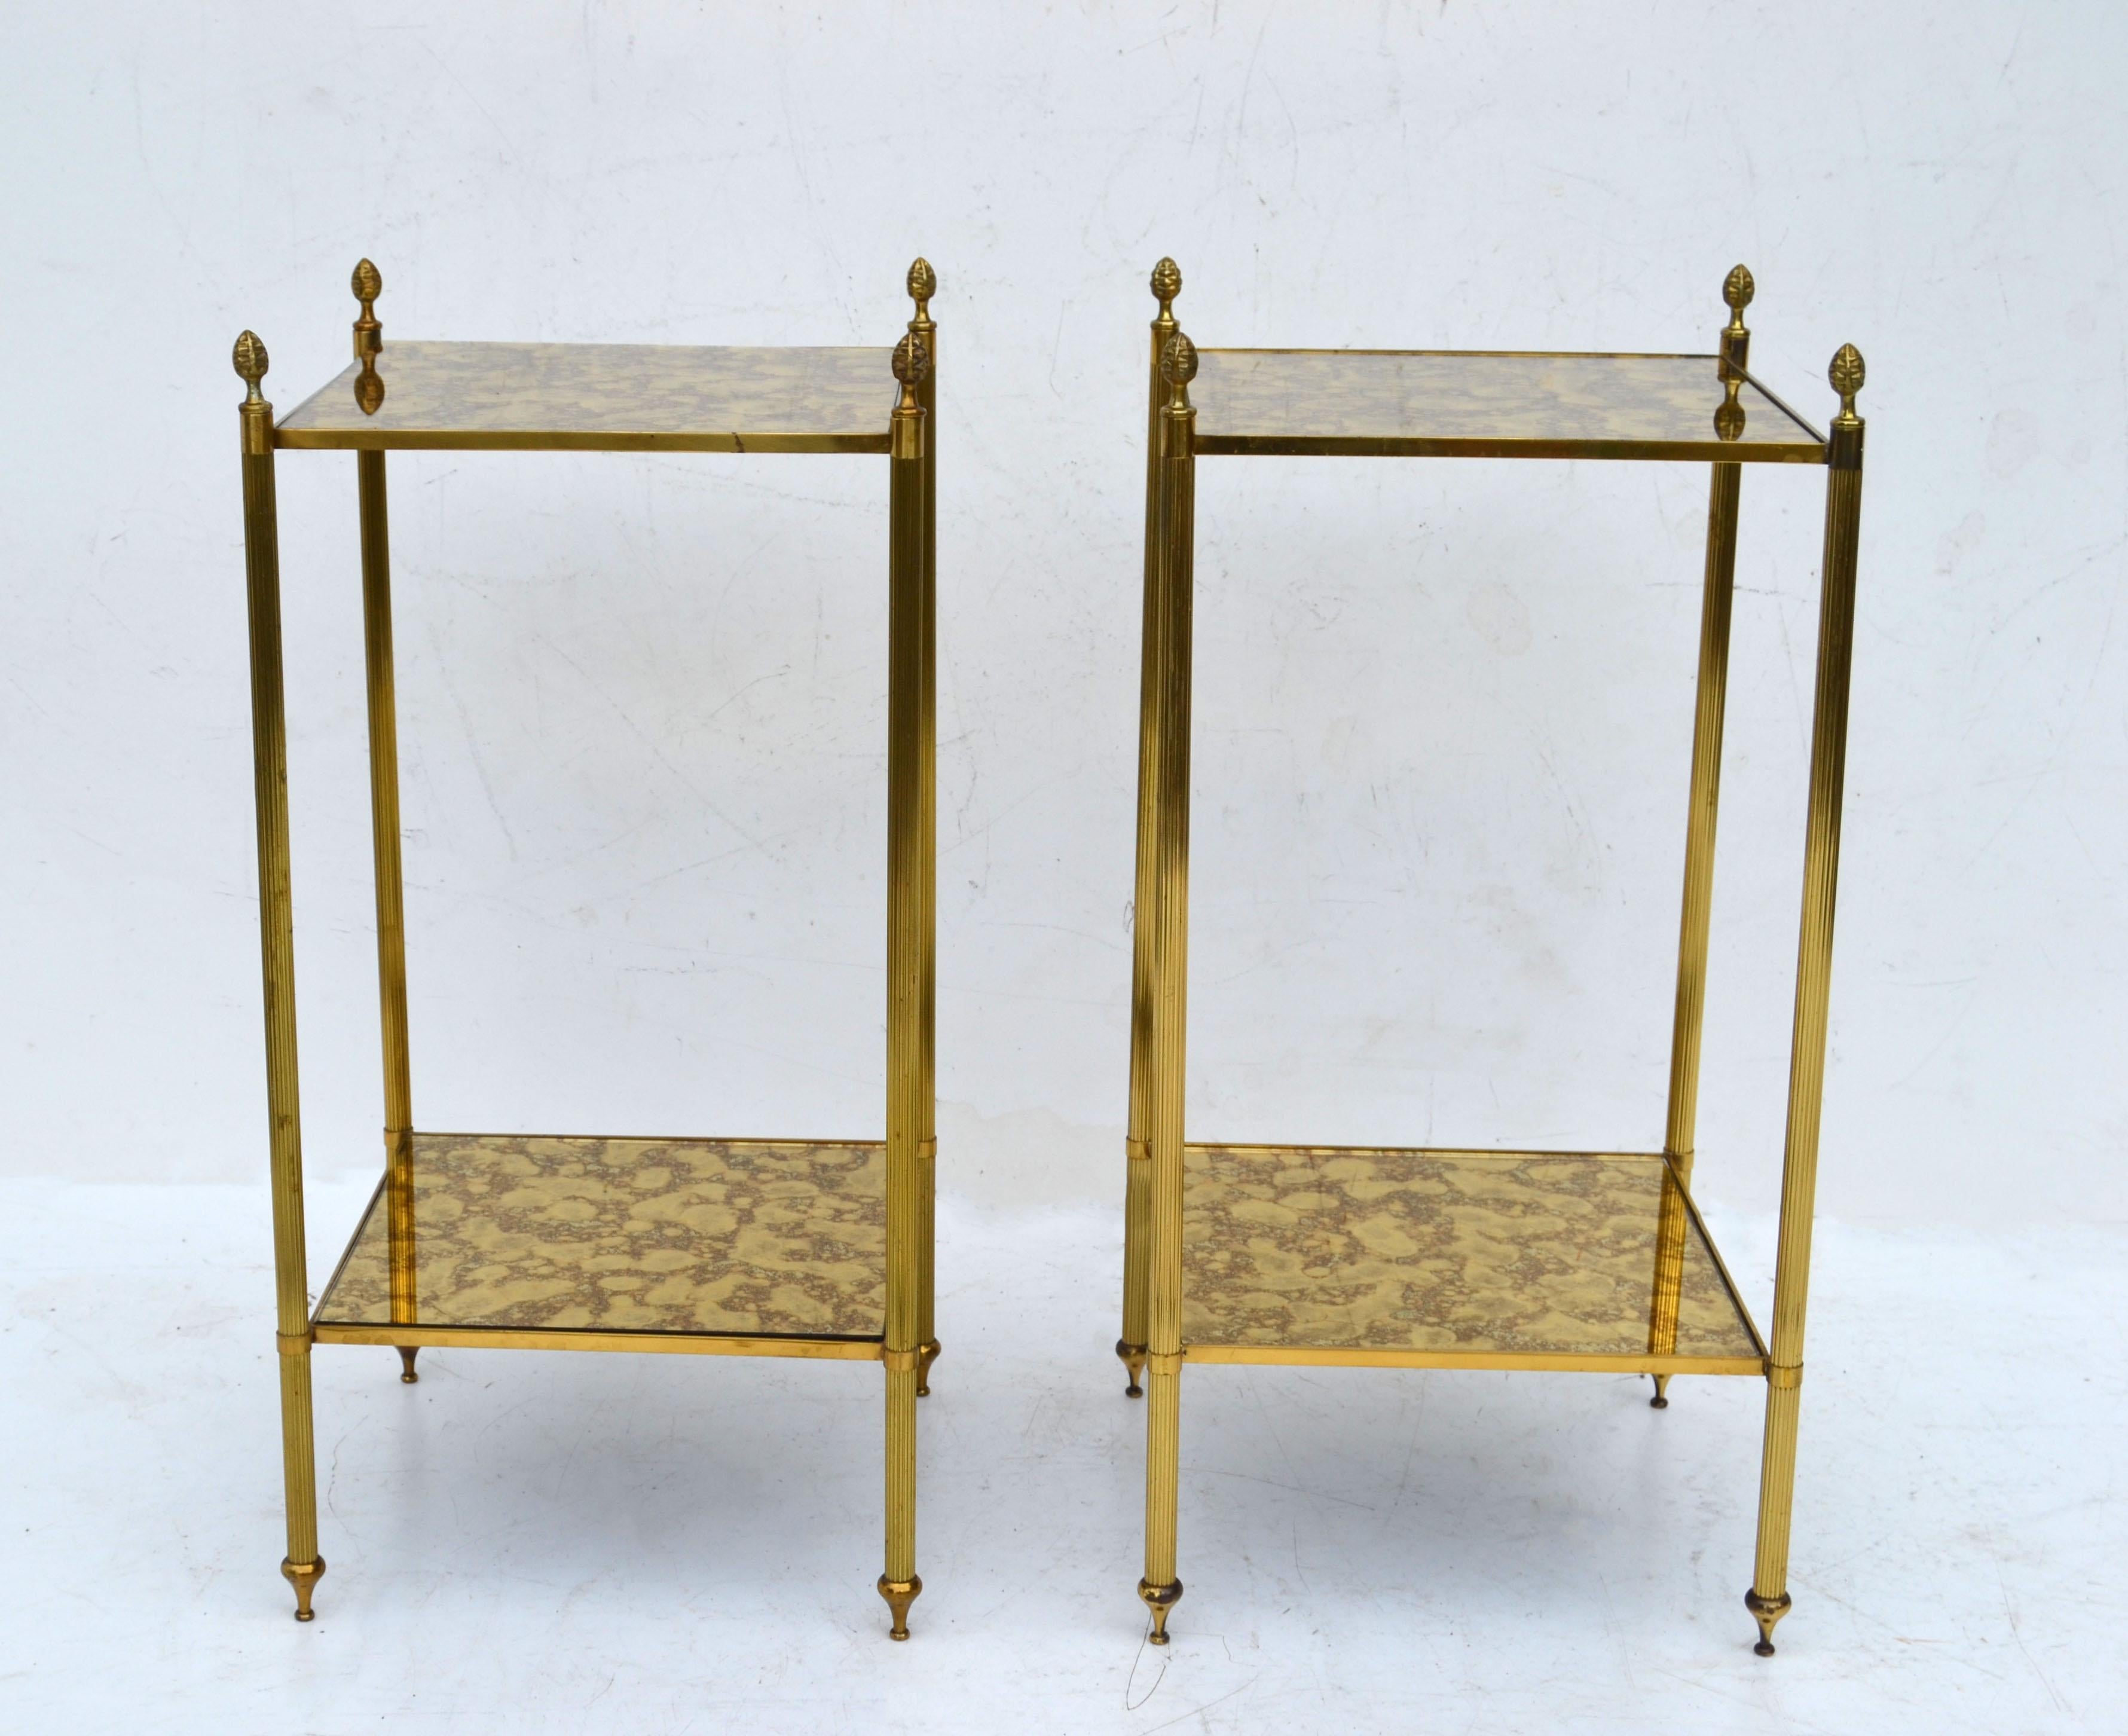 Patinated Maison Jansen Brass & Antique Mirror Glass Neoclassical Side Table France, Pair